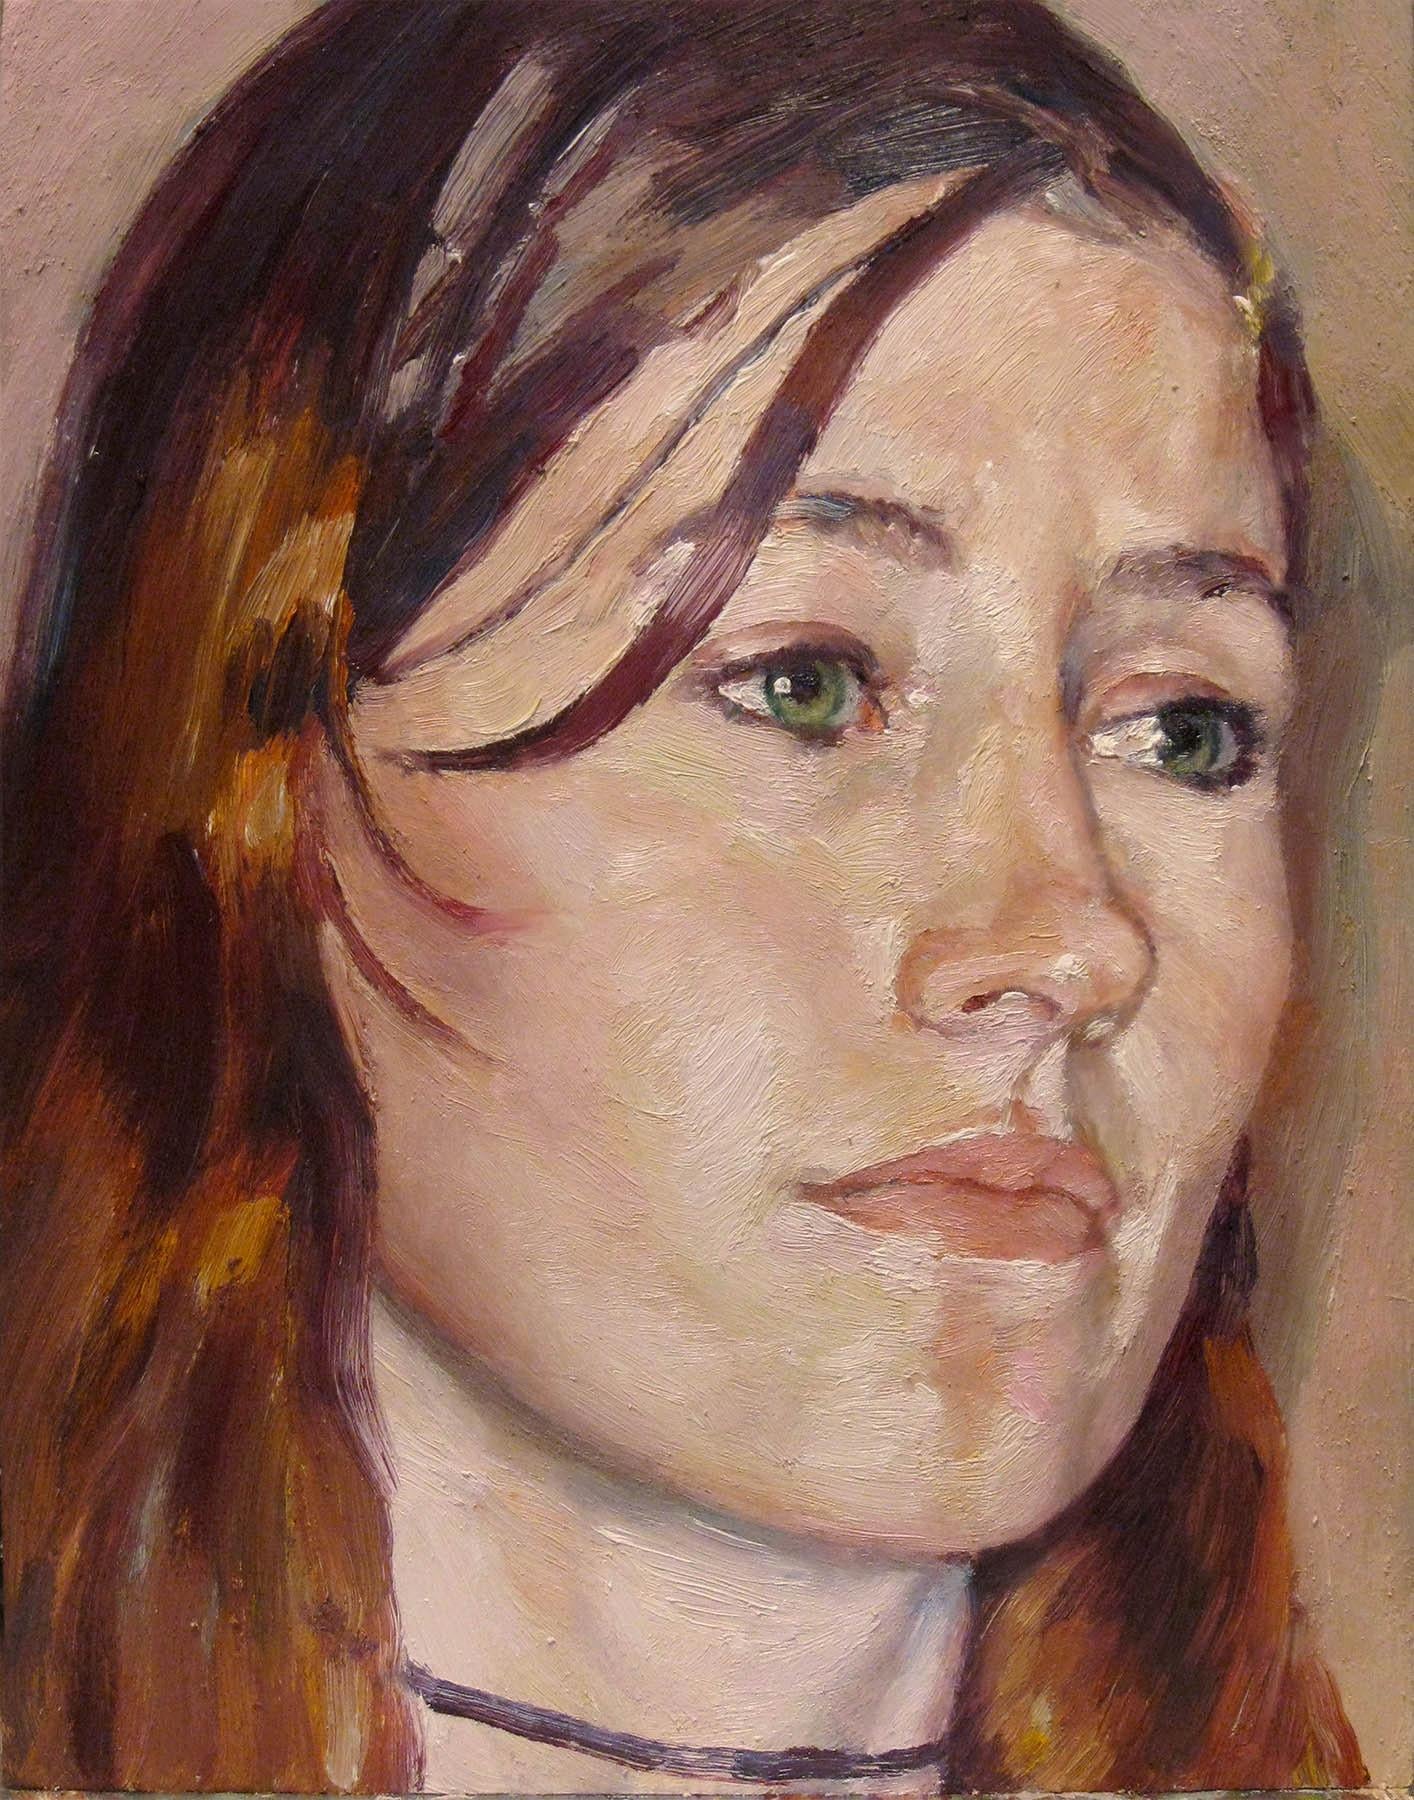 Stephen Wright Portrait Painting - CONSTANCE I - Contemporary Realism / Figurative Art / Red Hair